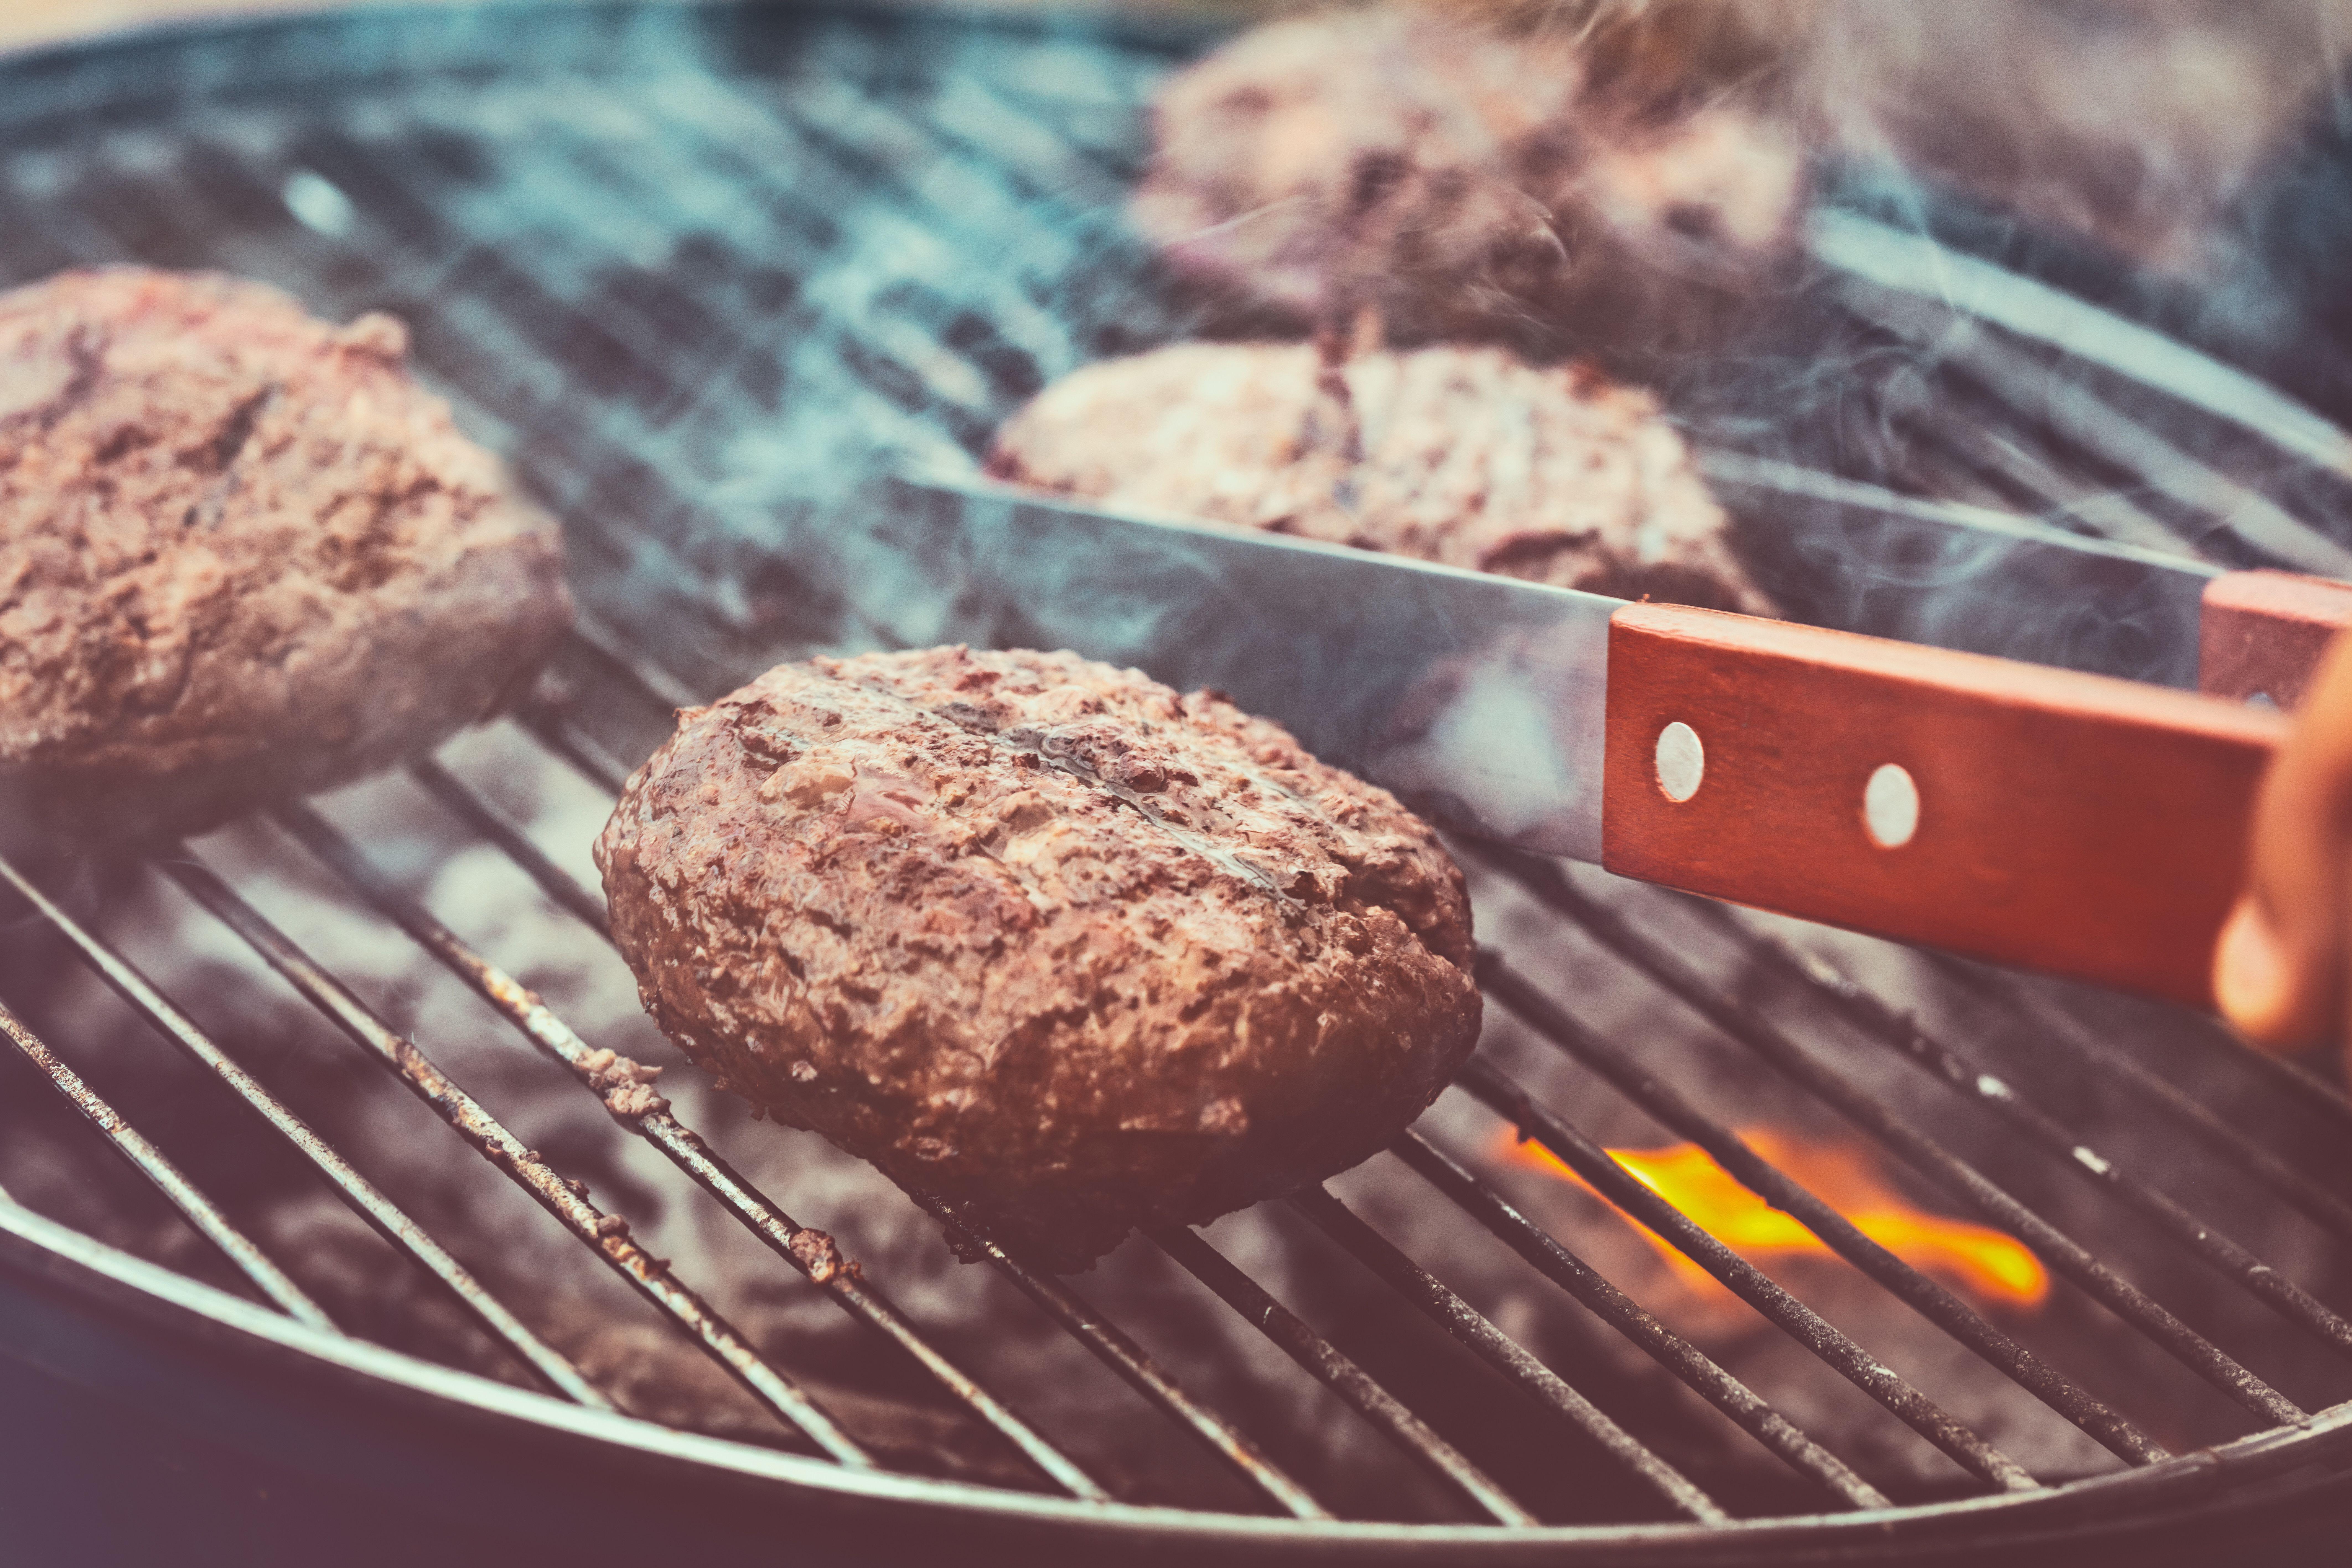 Barbecuing a plant-based burger (Image: Panther Media GmbH / Alamy) 